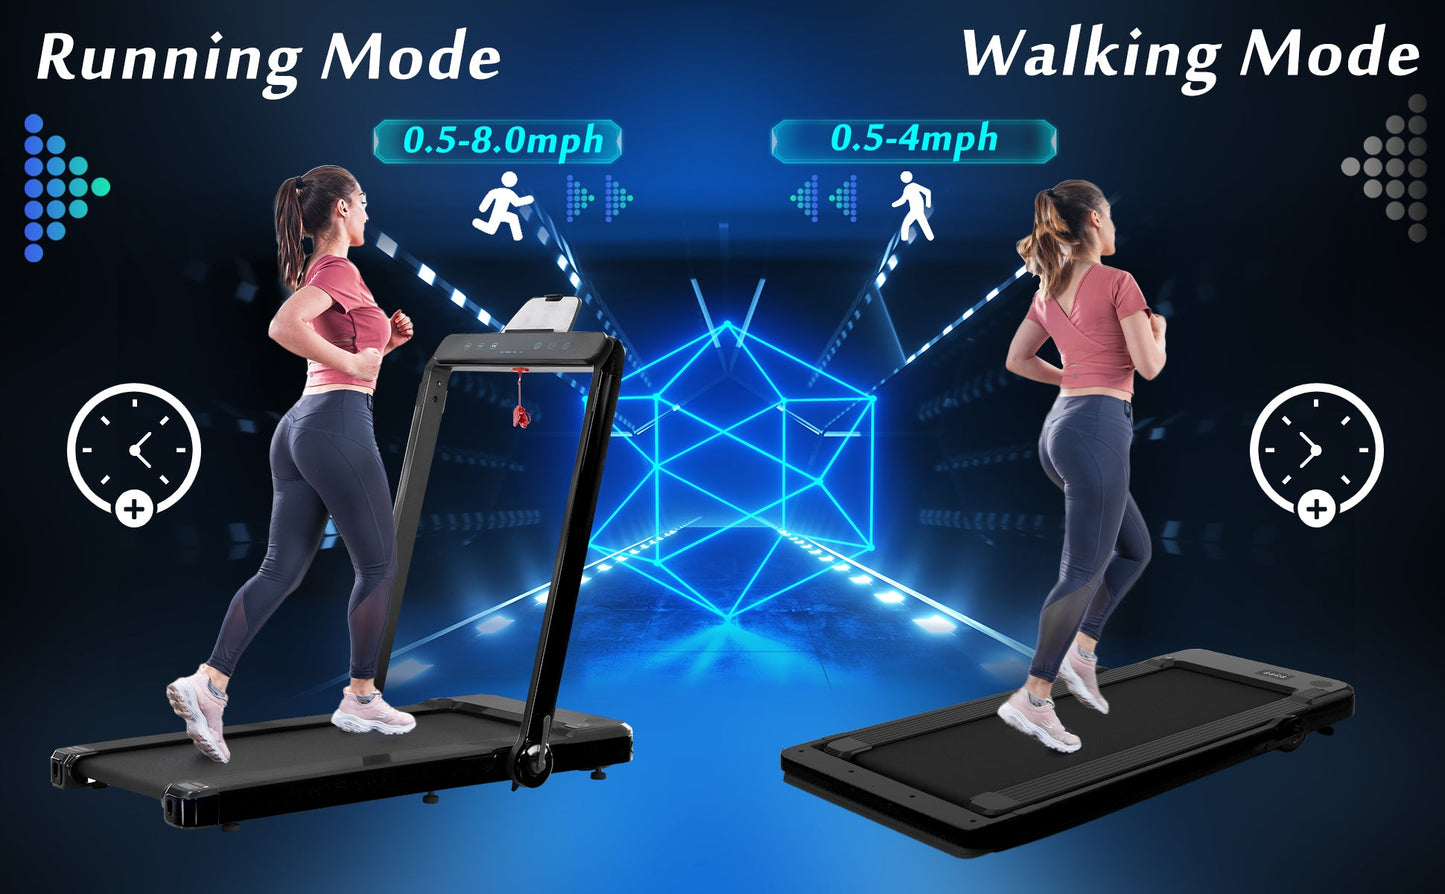 Cruce Electric Folding Treadmill, Installation Free with Bluetooth APP and Speaker, Remote Control with Display for Home, Gym & Office